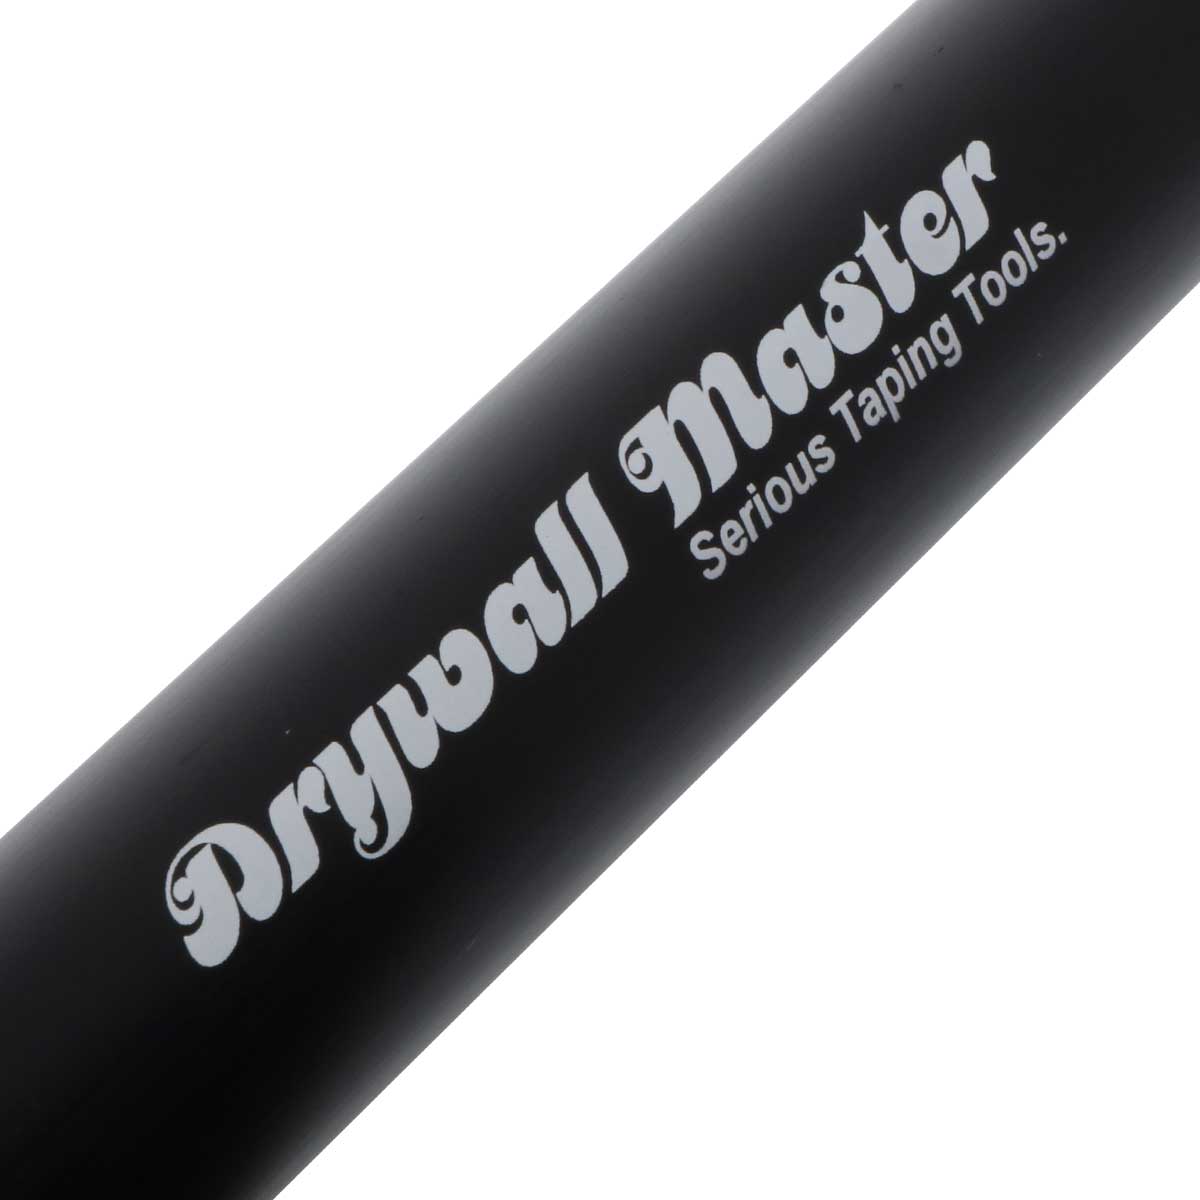 Drywall Master 24" Extension Handle